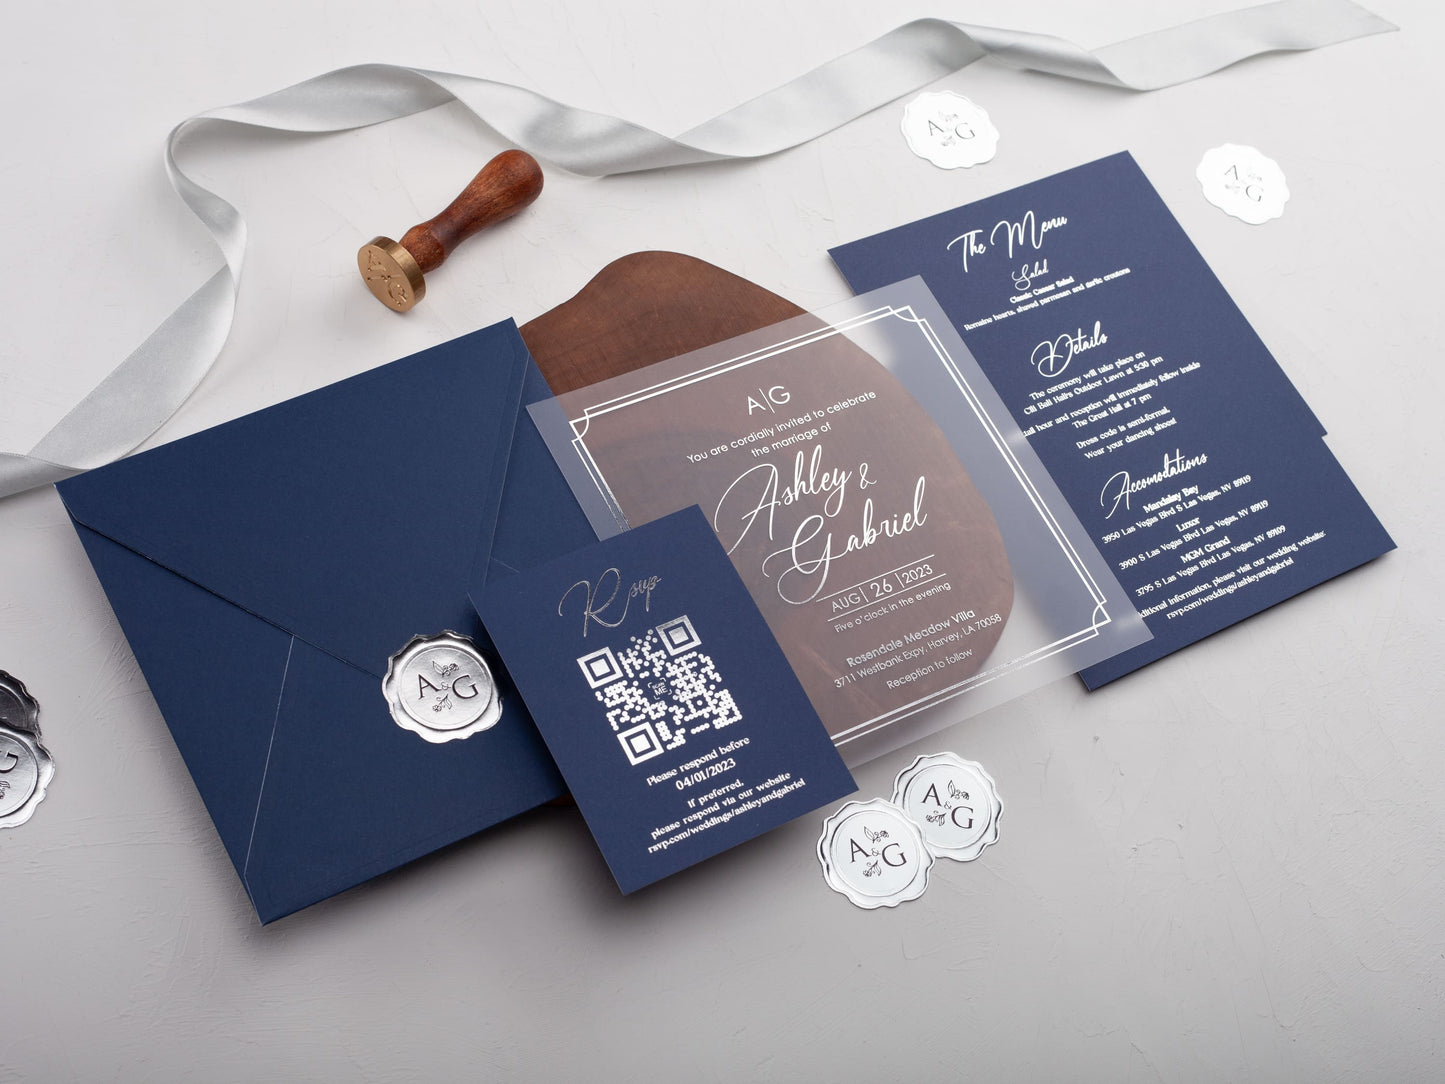 Acrylic Invitation with Silver Foil and Navy Blue Envelope